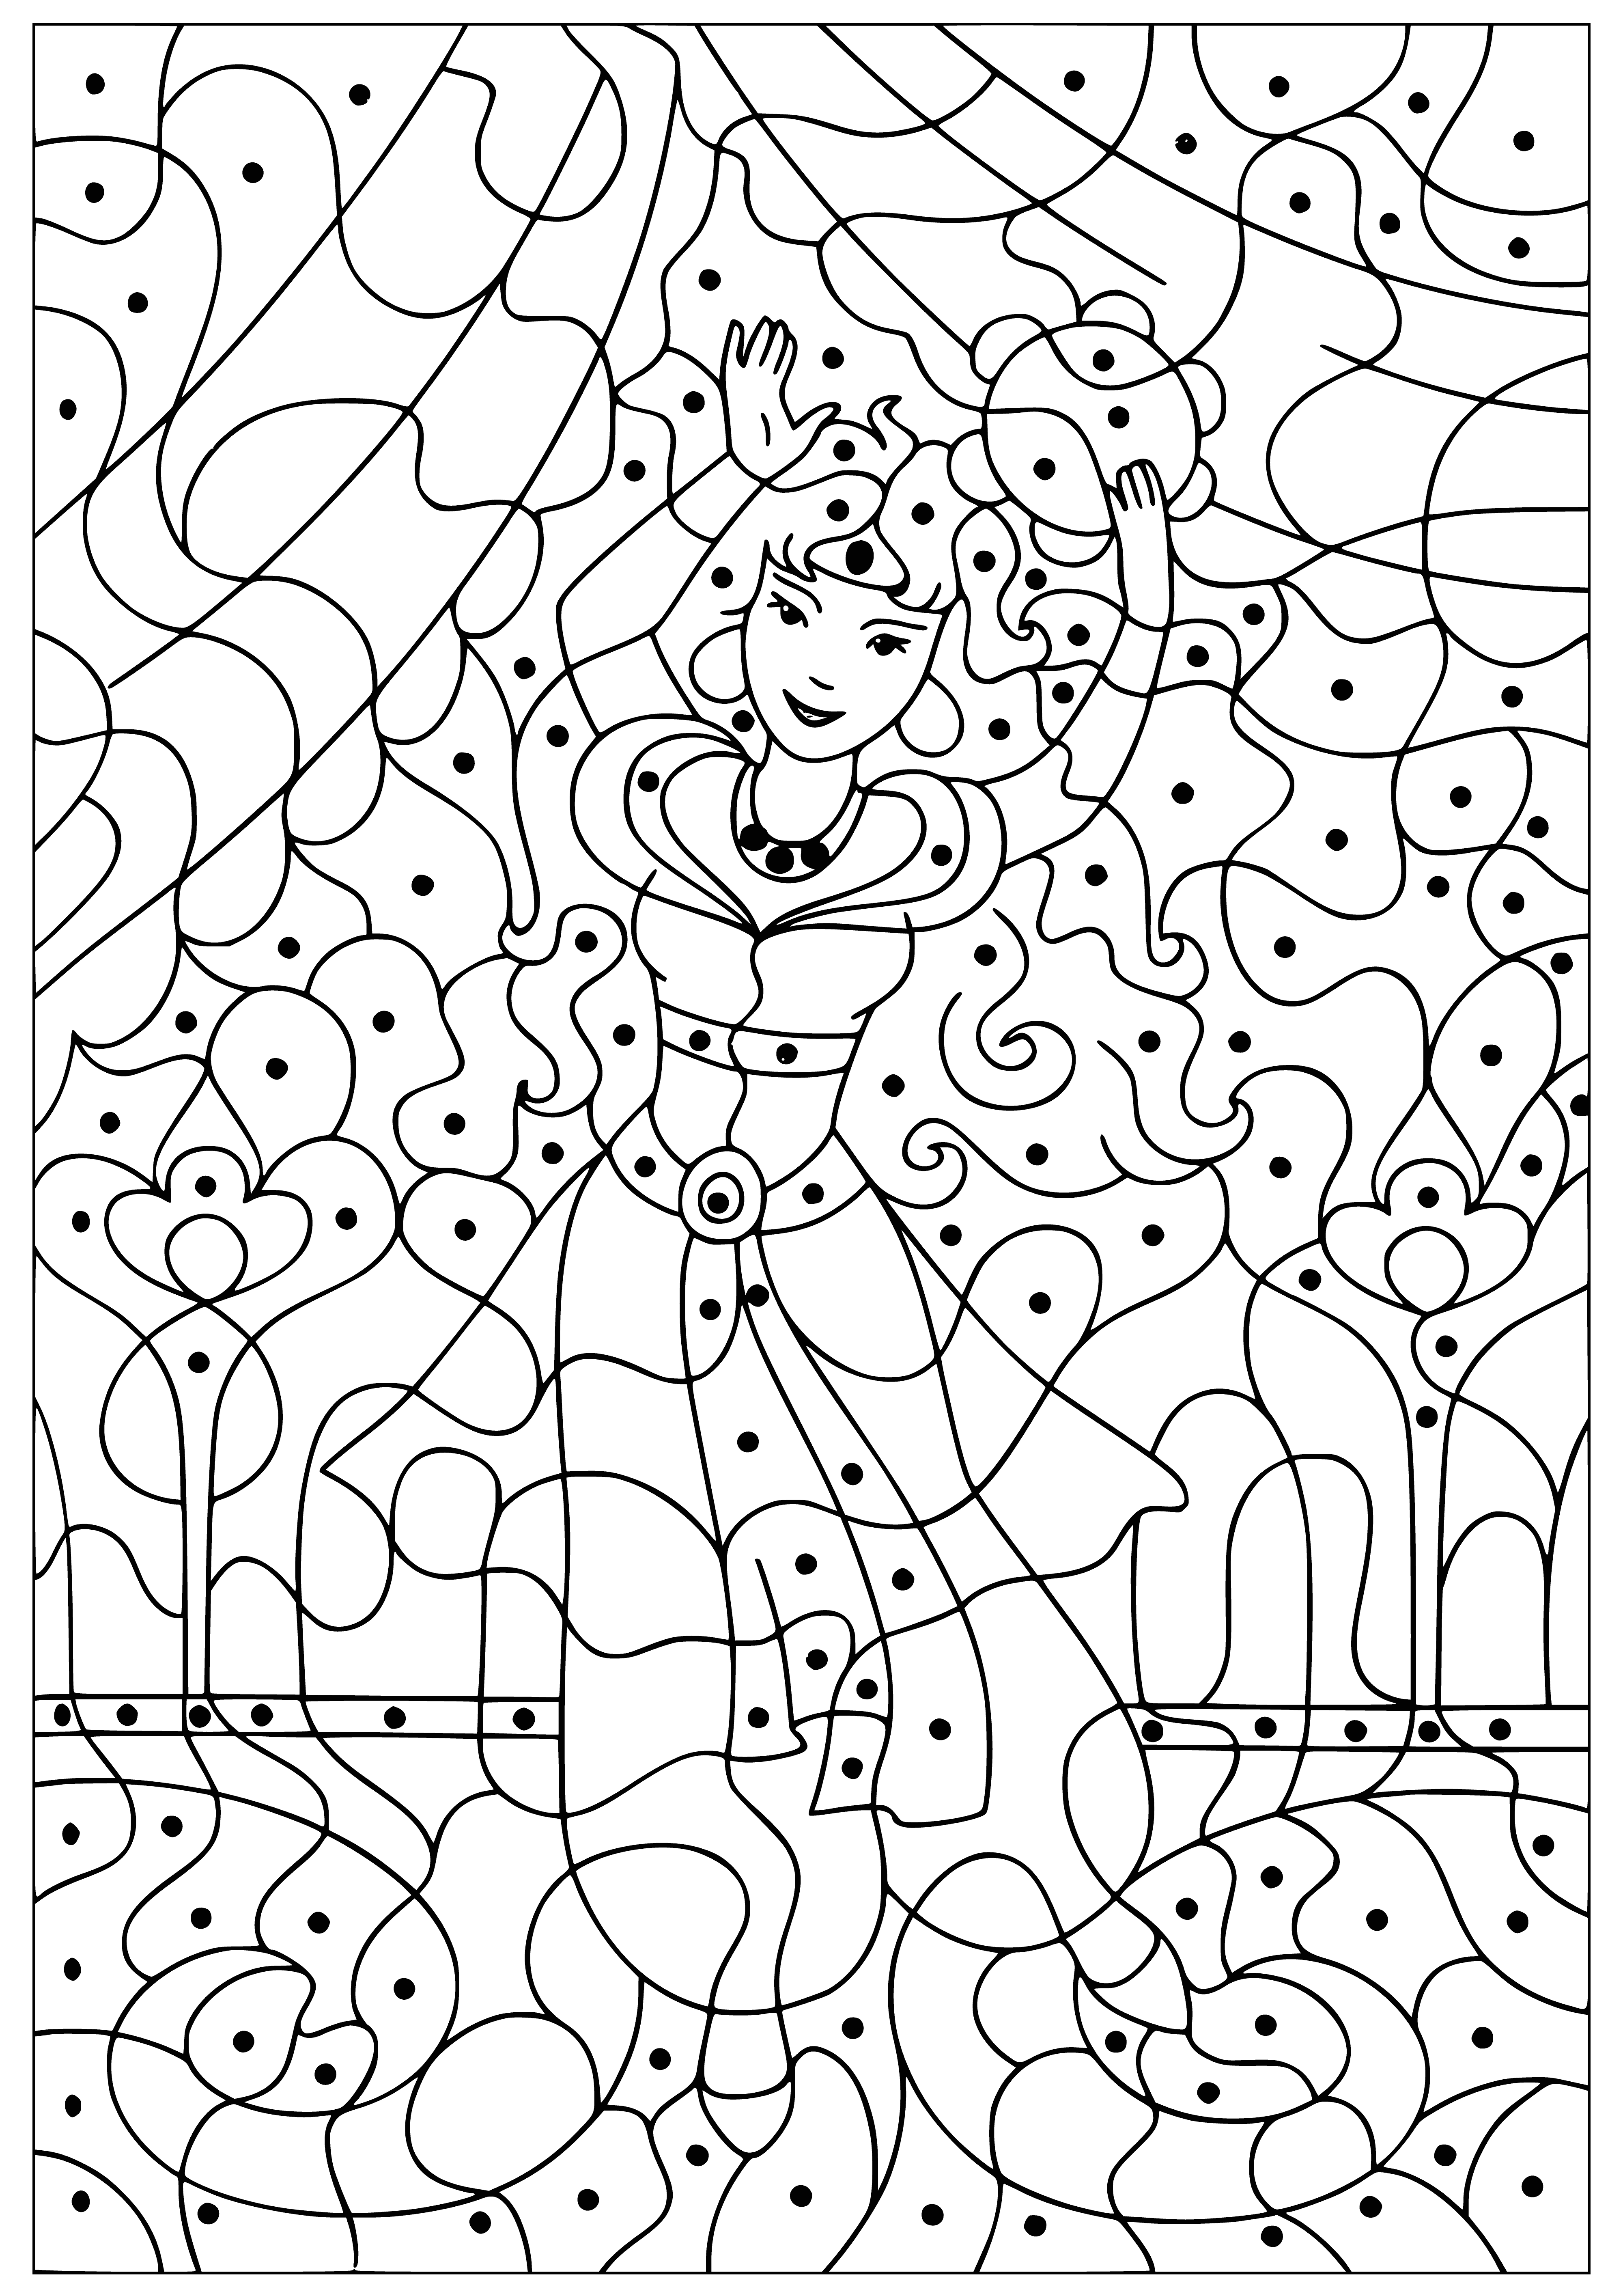 East Dance coloring page